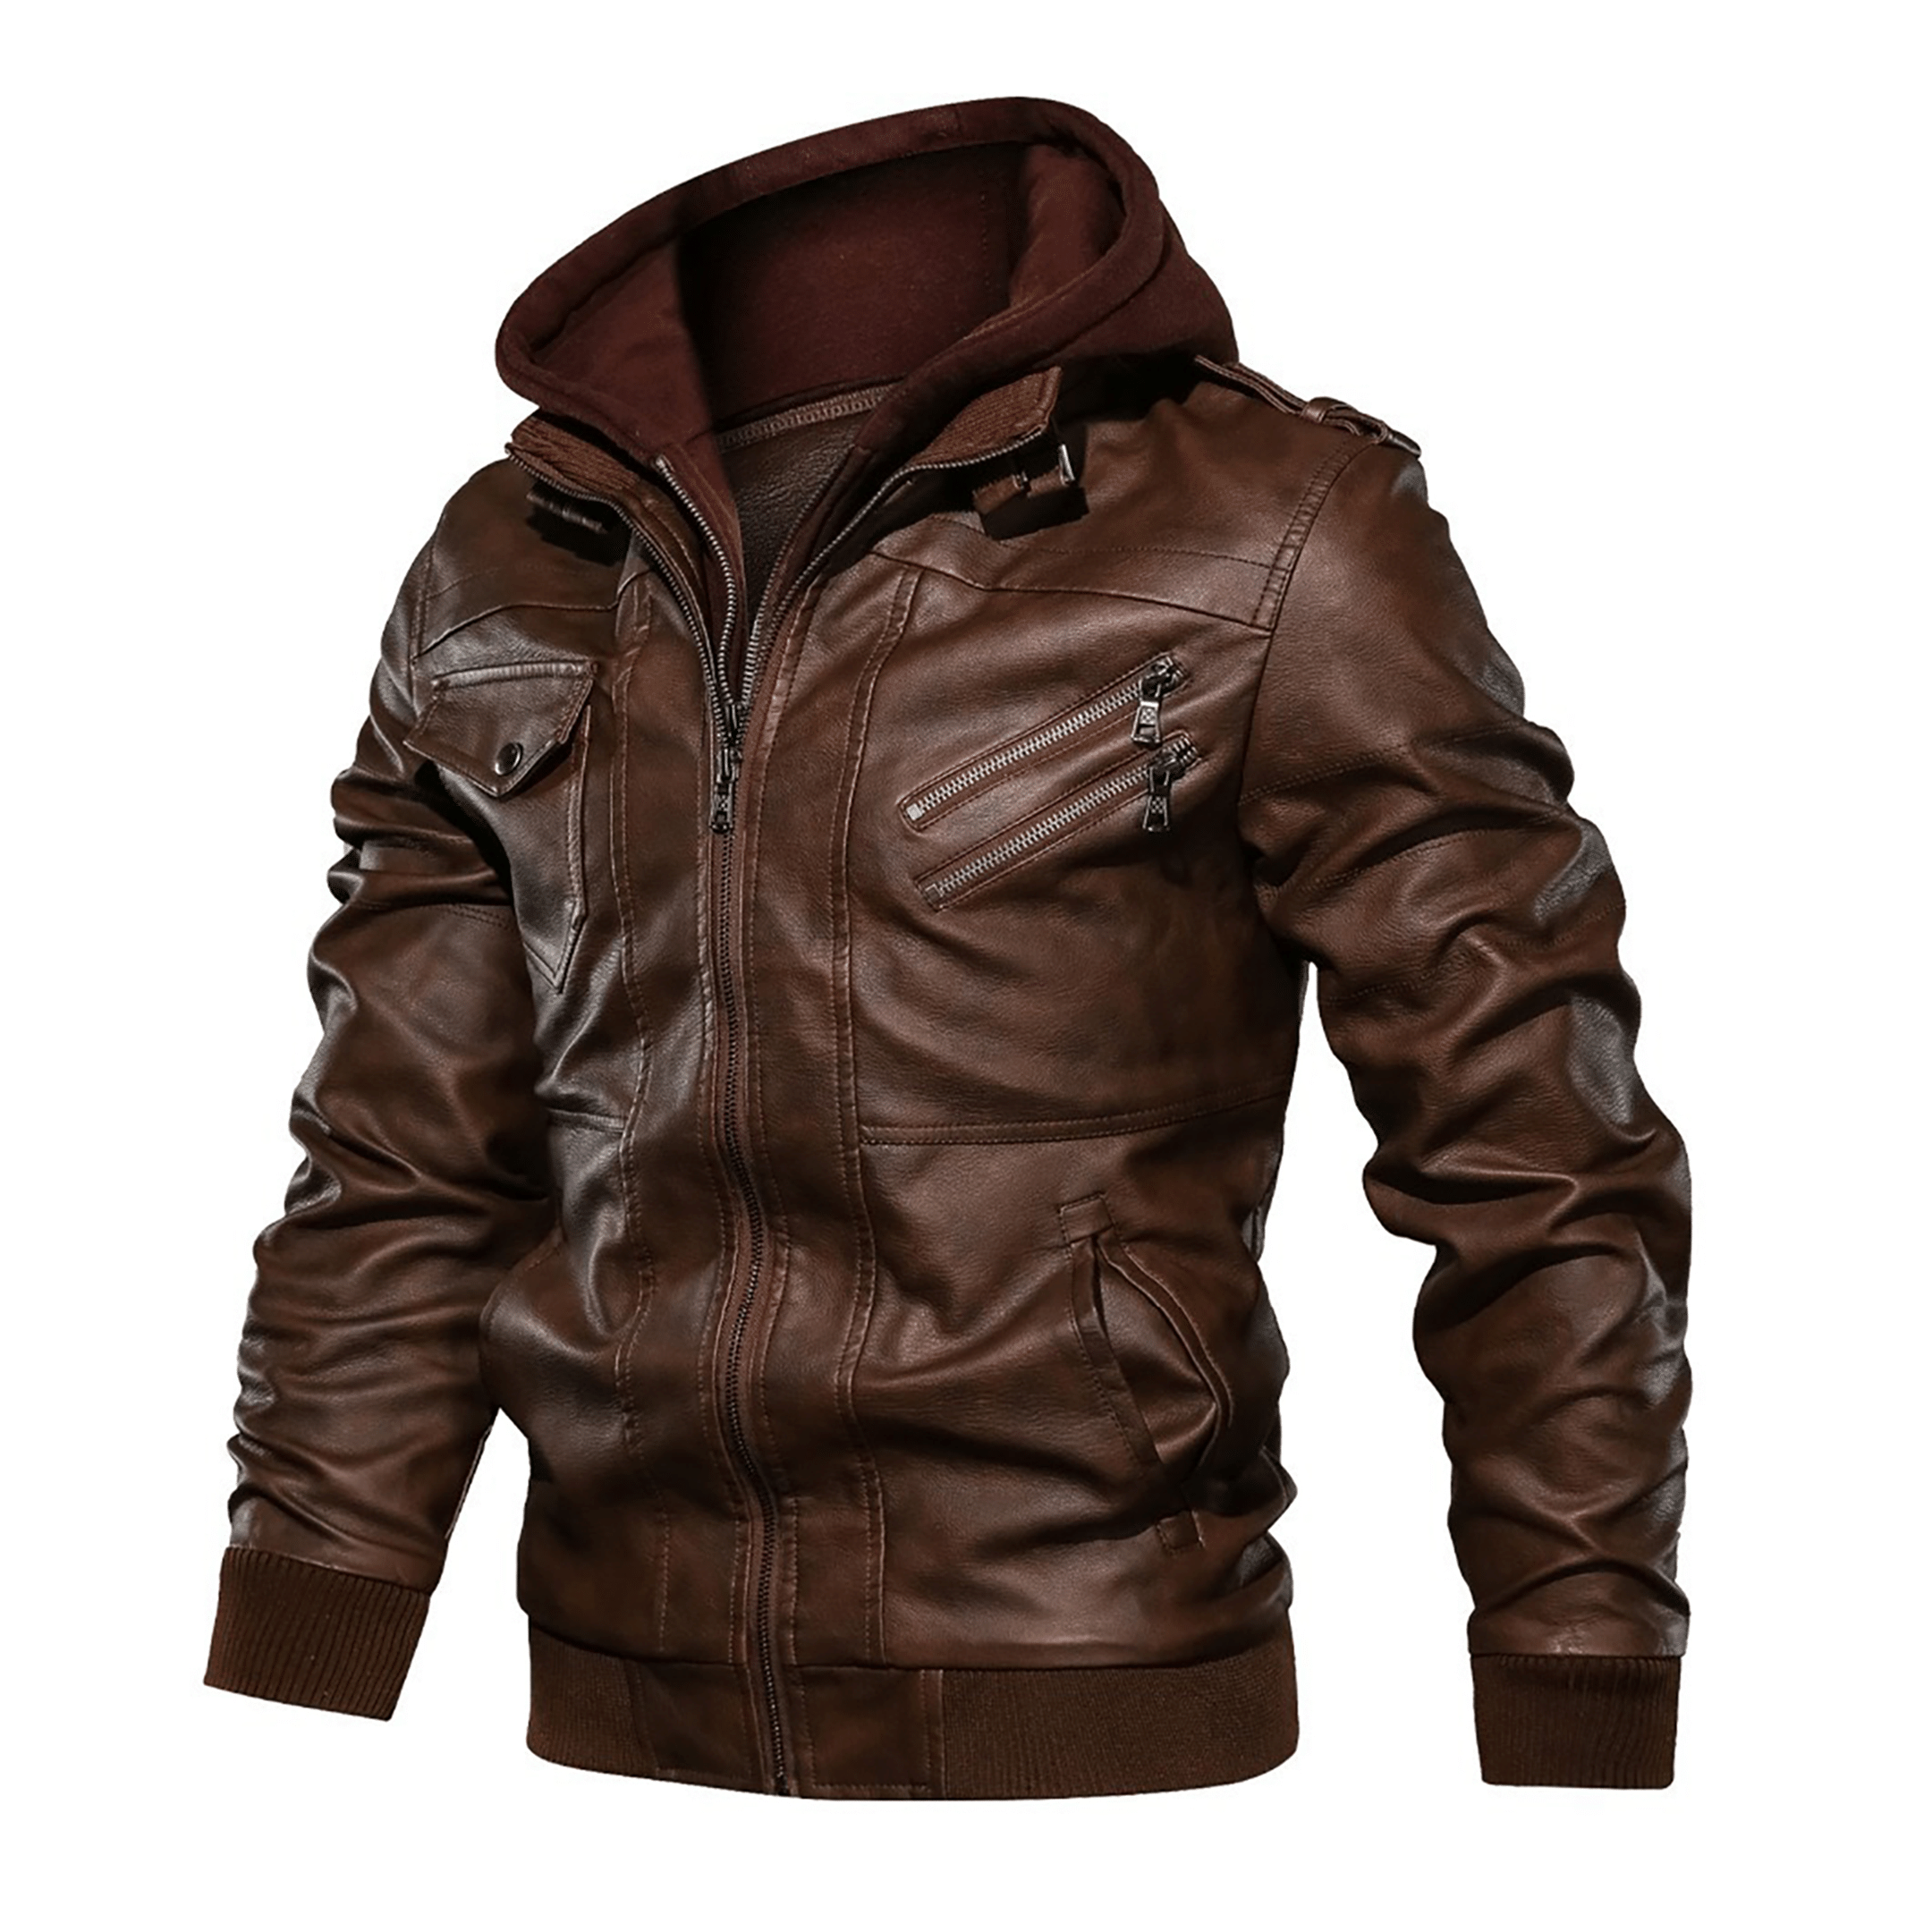 Top leather jackets and latest products 201